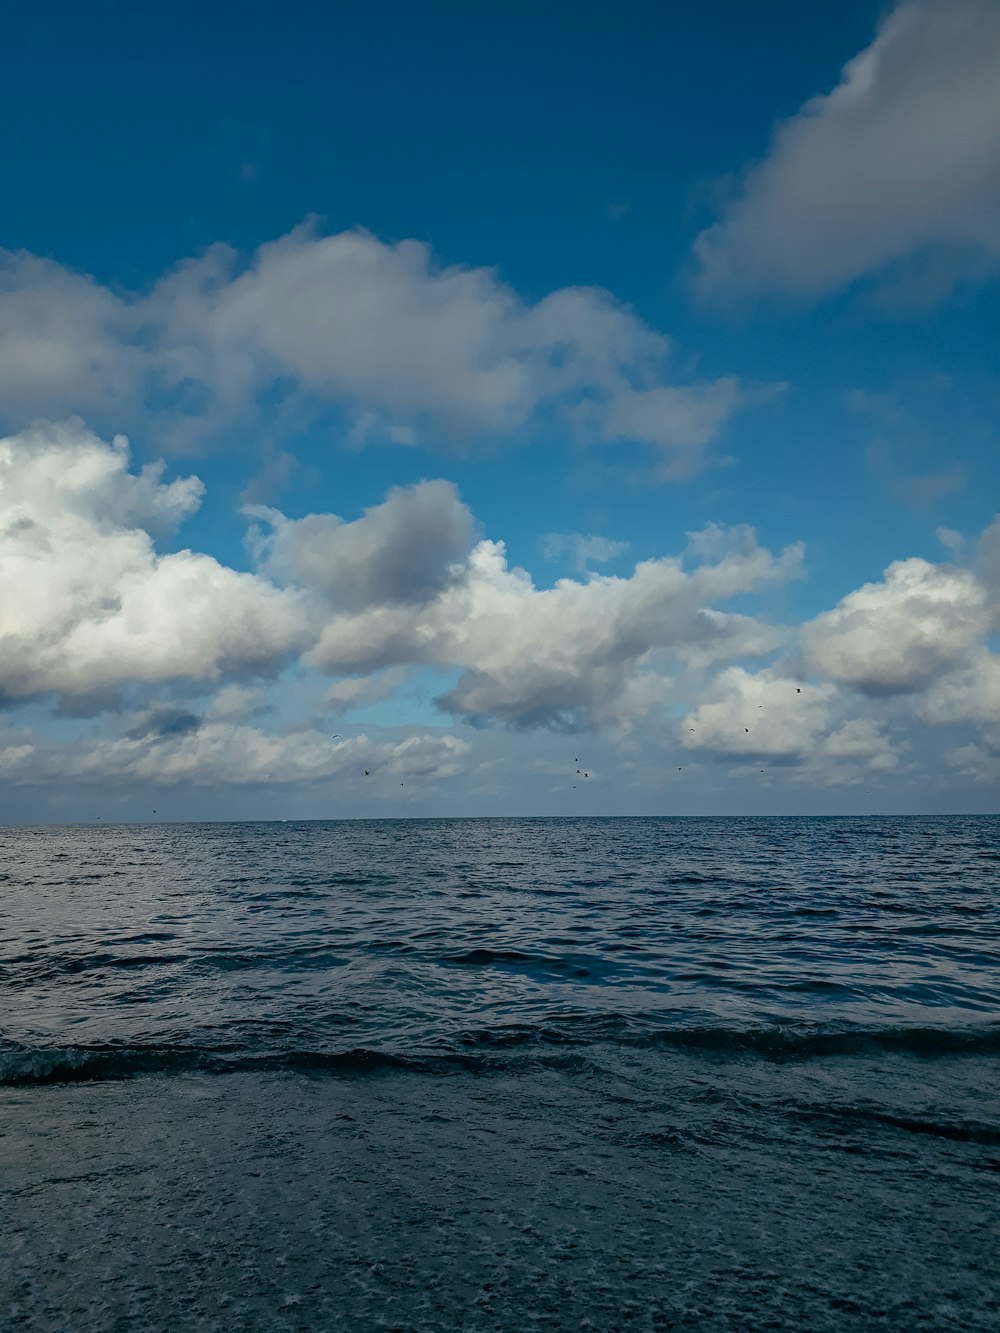 ocean under blue and white cloudy sky during daytime